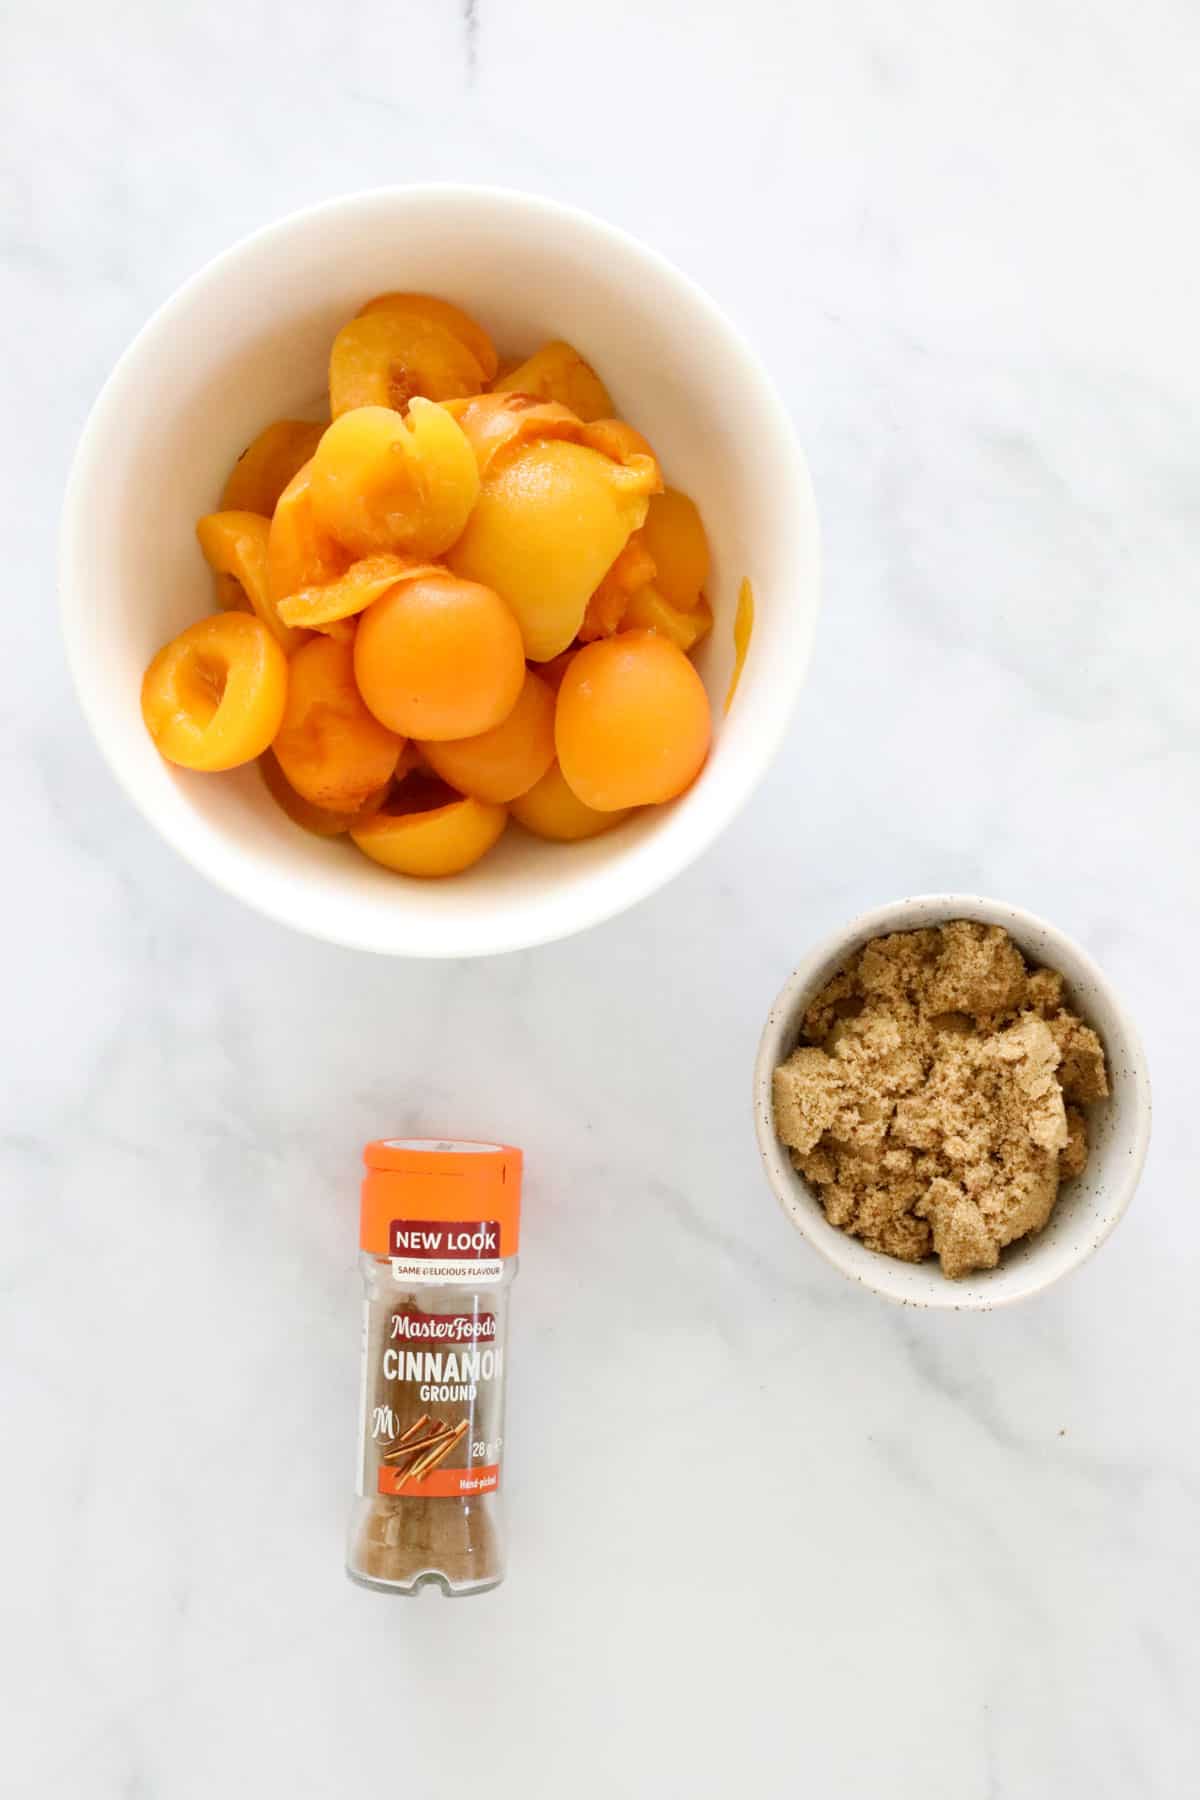 A bowl of apricot halves, small bowl of brown sugar, and a jar of ground cinnamon.